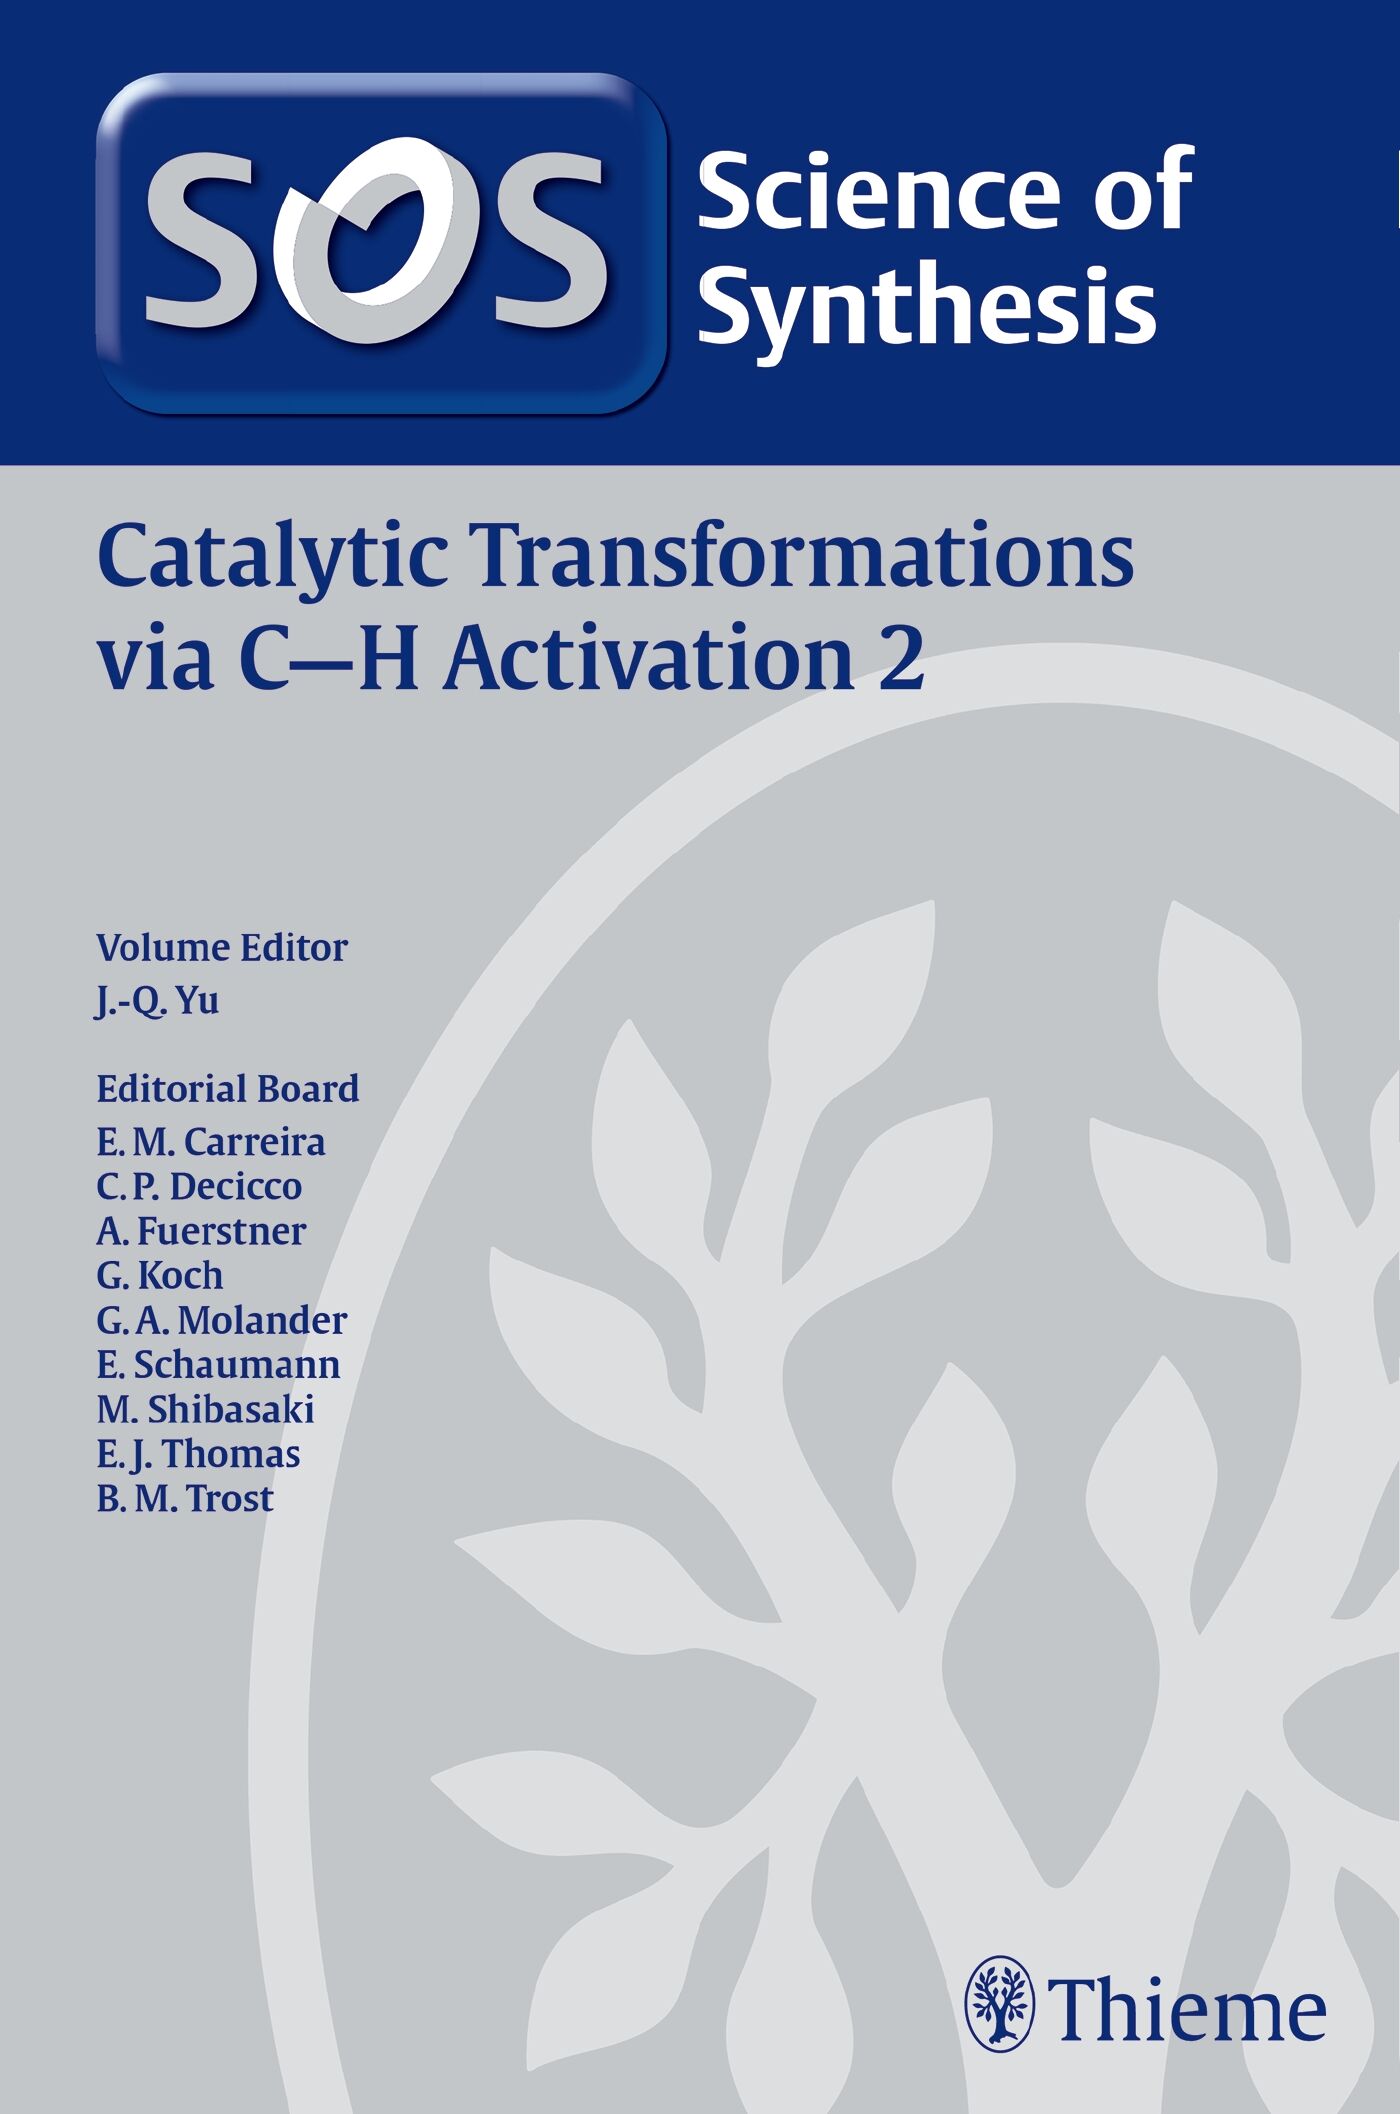 Science of Synthesis: Catalytic Transformations via C-H Activation Vol. 2, 9783132057210